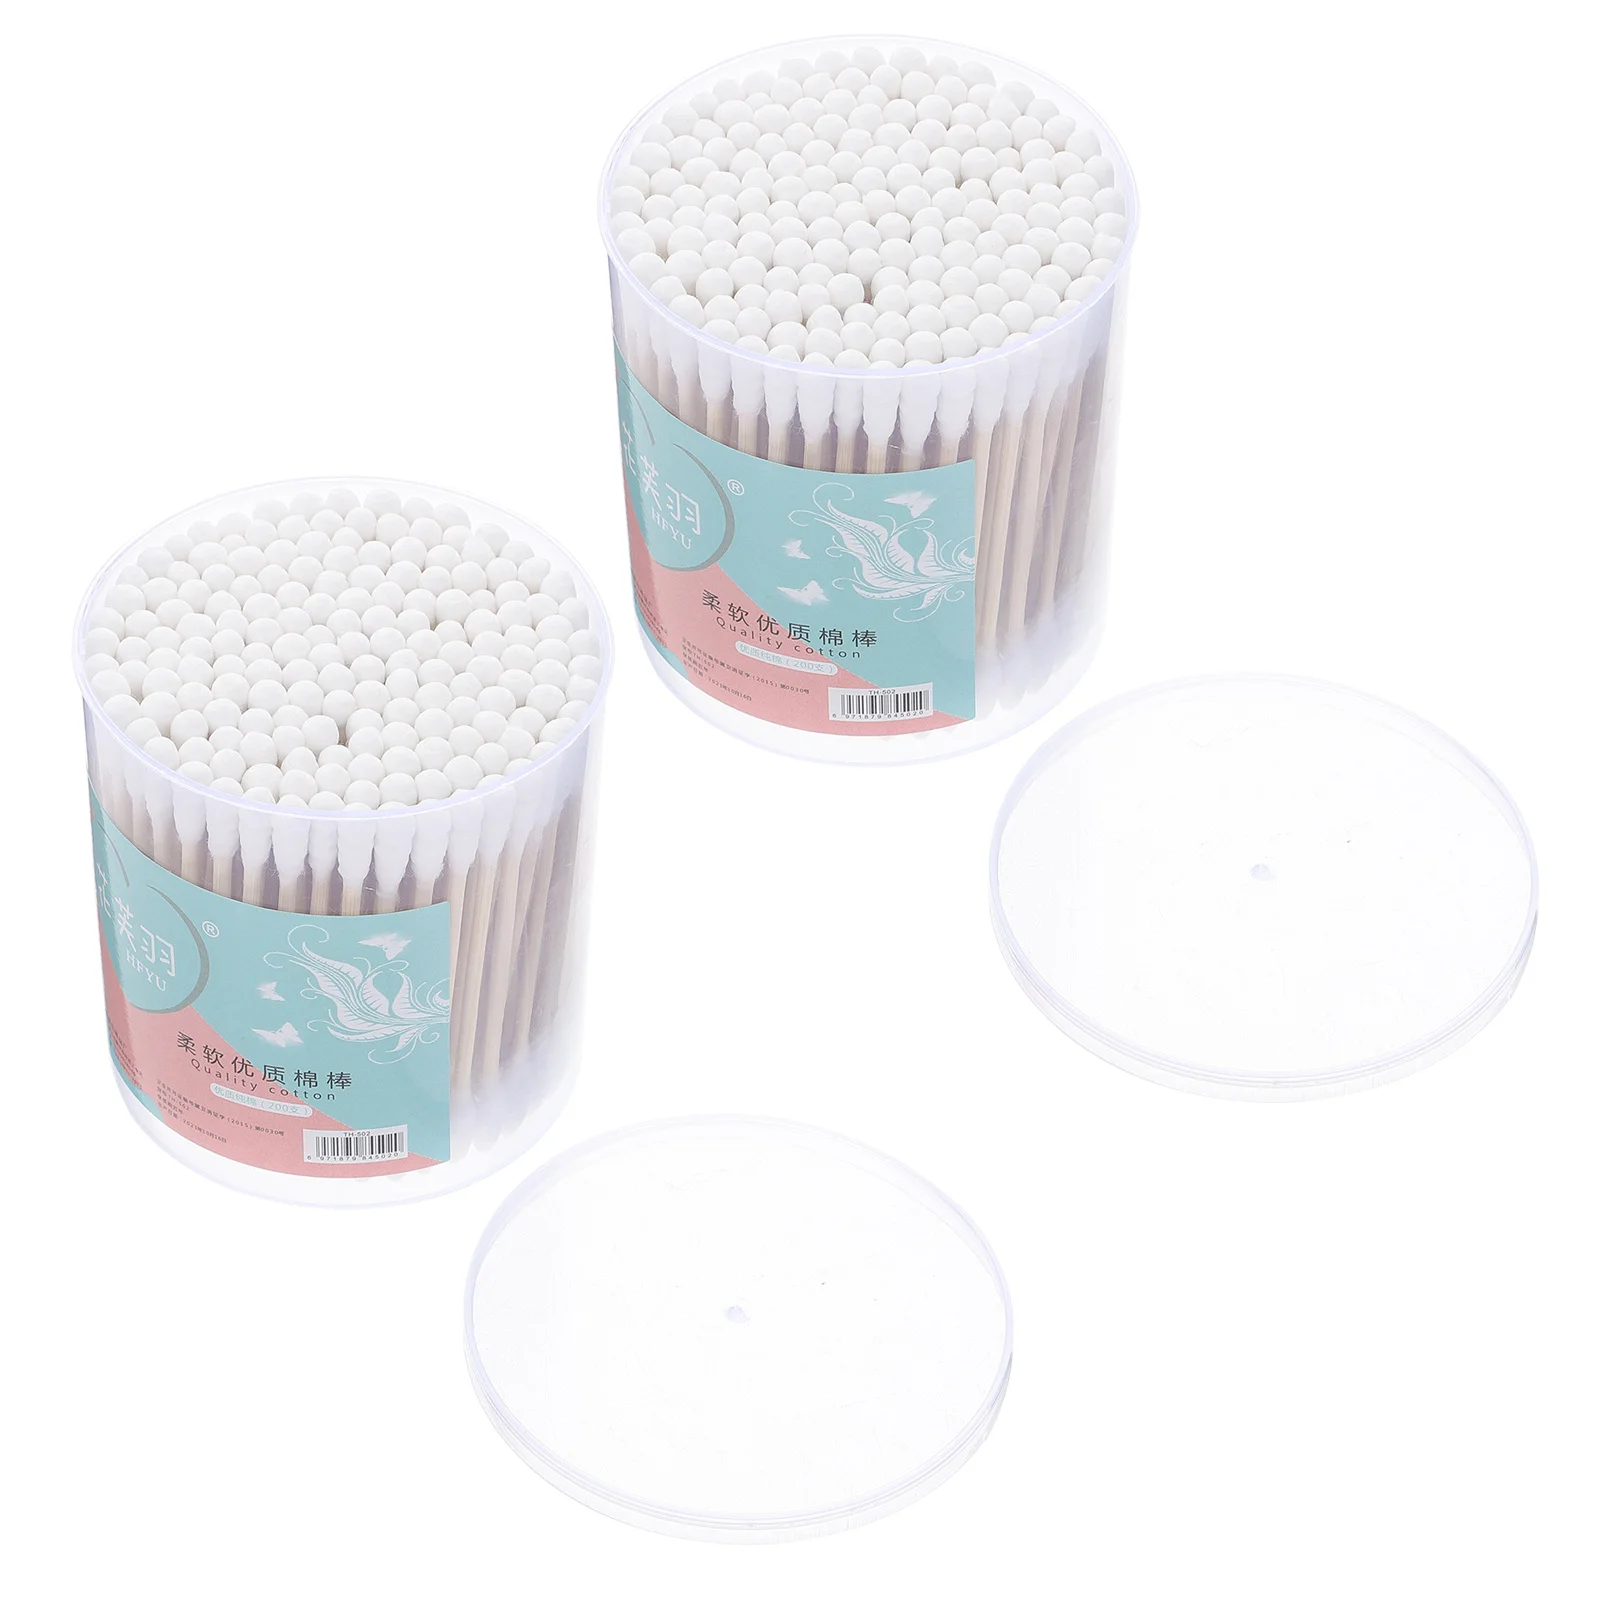 Baby Cotton Swabs 2 Box 400Pcs Baby Safety Swabs Double Spiral Tips Cotton Swabs Paper Sticks Natural Cotton Buds Ear